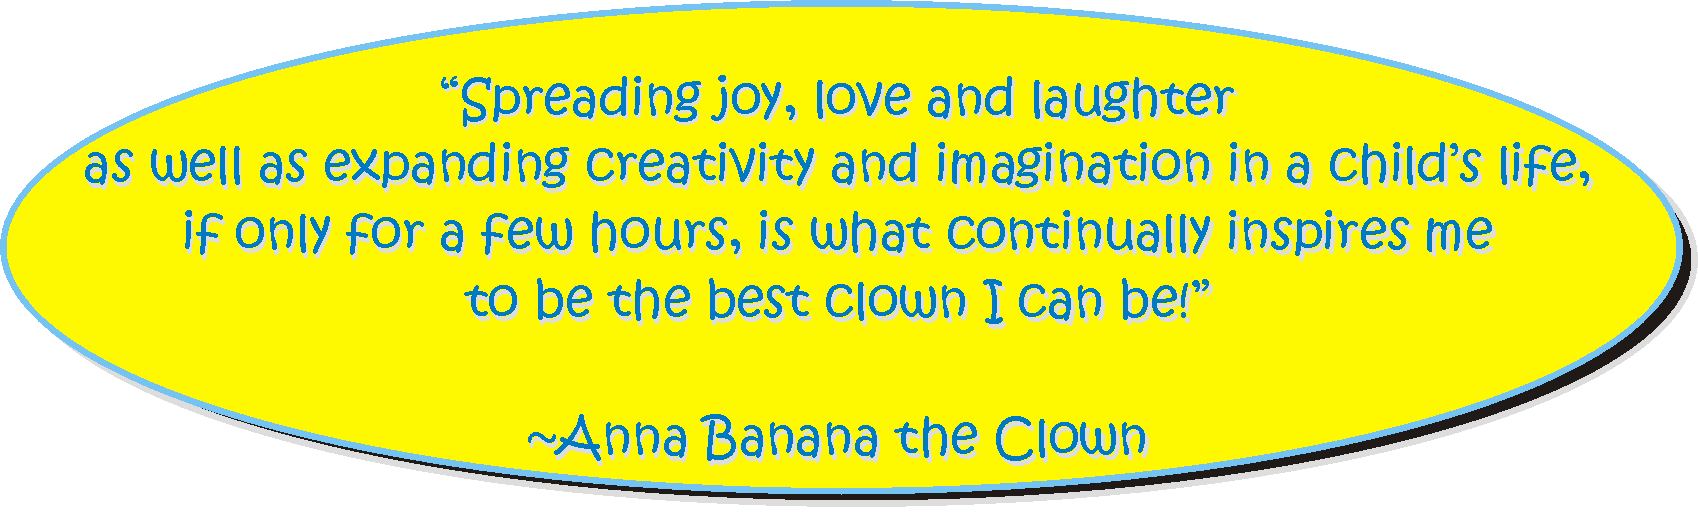 Spreading joy, love and laughter as well as expanding creativity and imagination in a child's life, if only for a few hours, is what continually inspires me to be the best clown I can be! -- Anna Banana the Clown with appeal